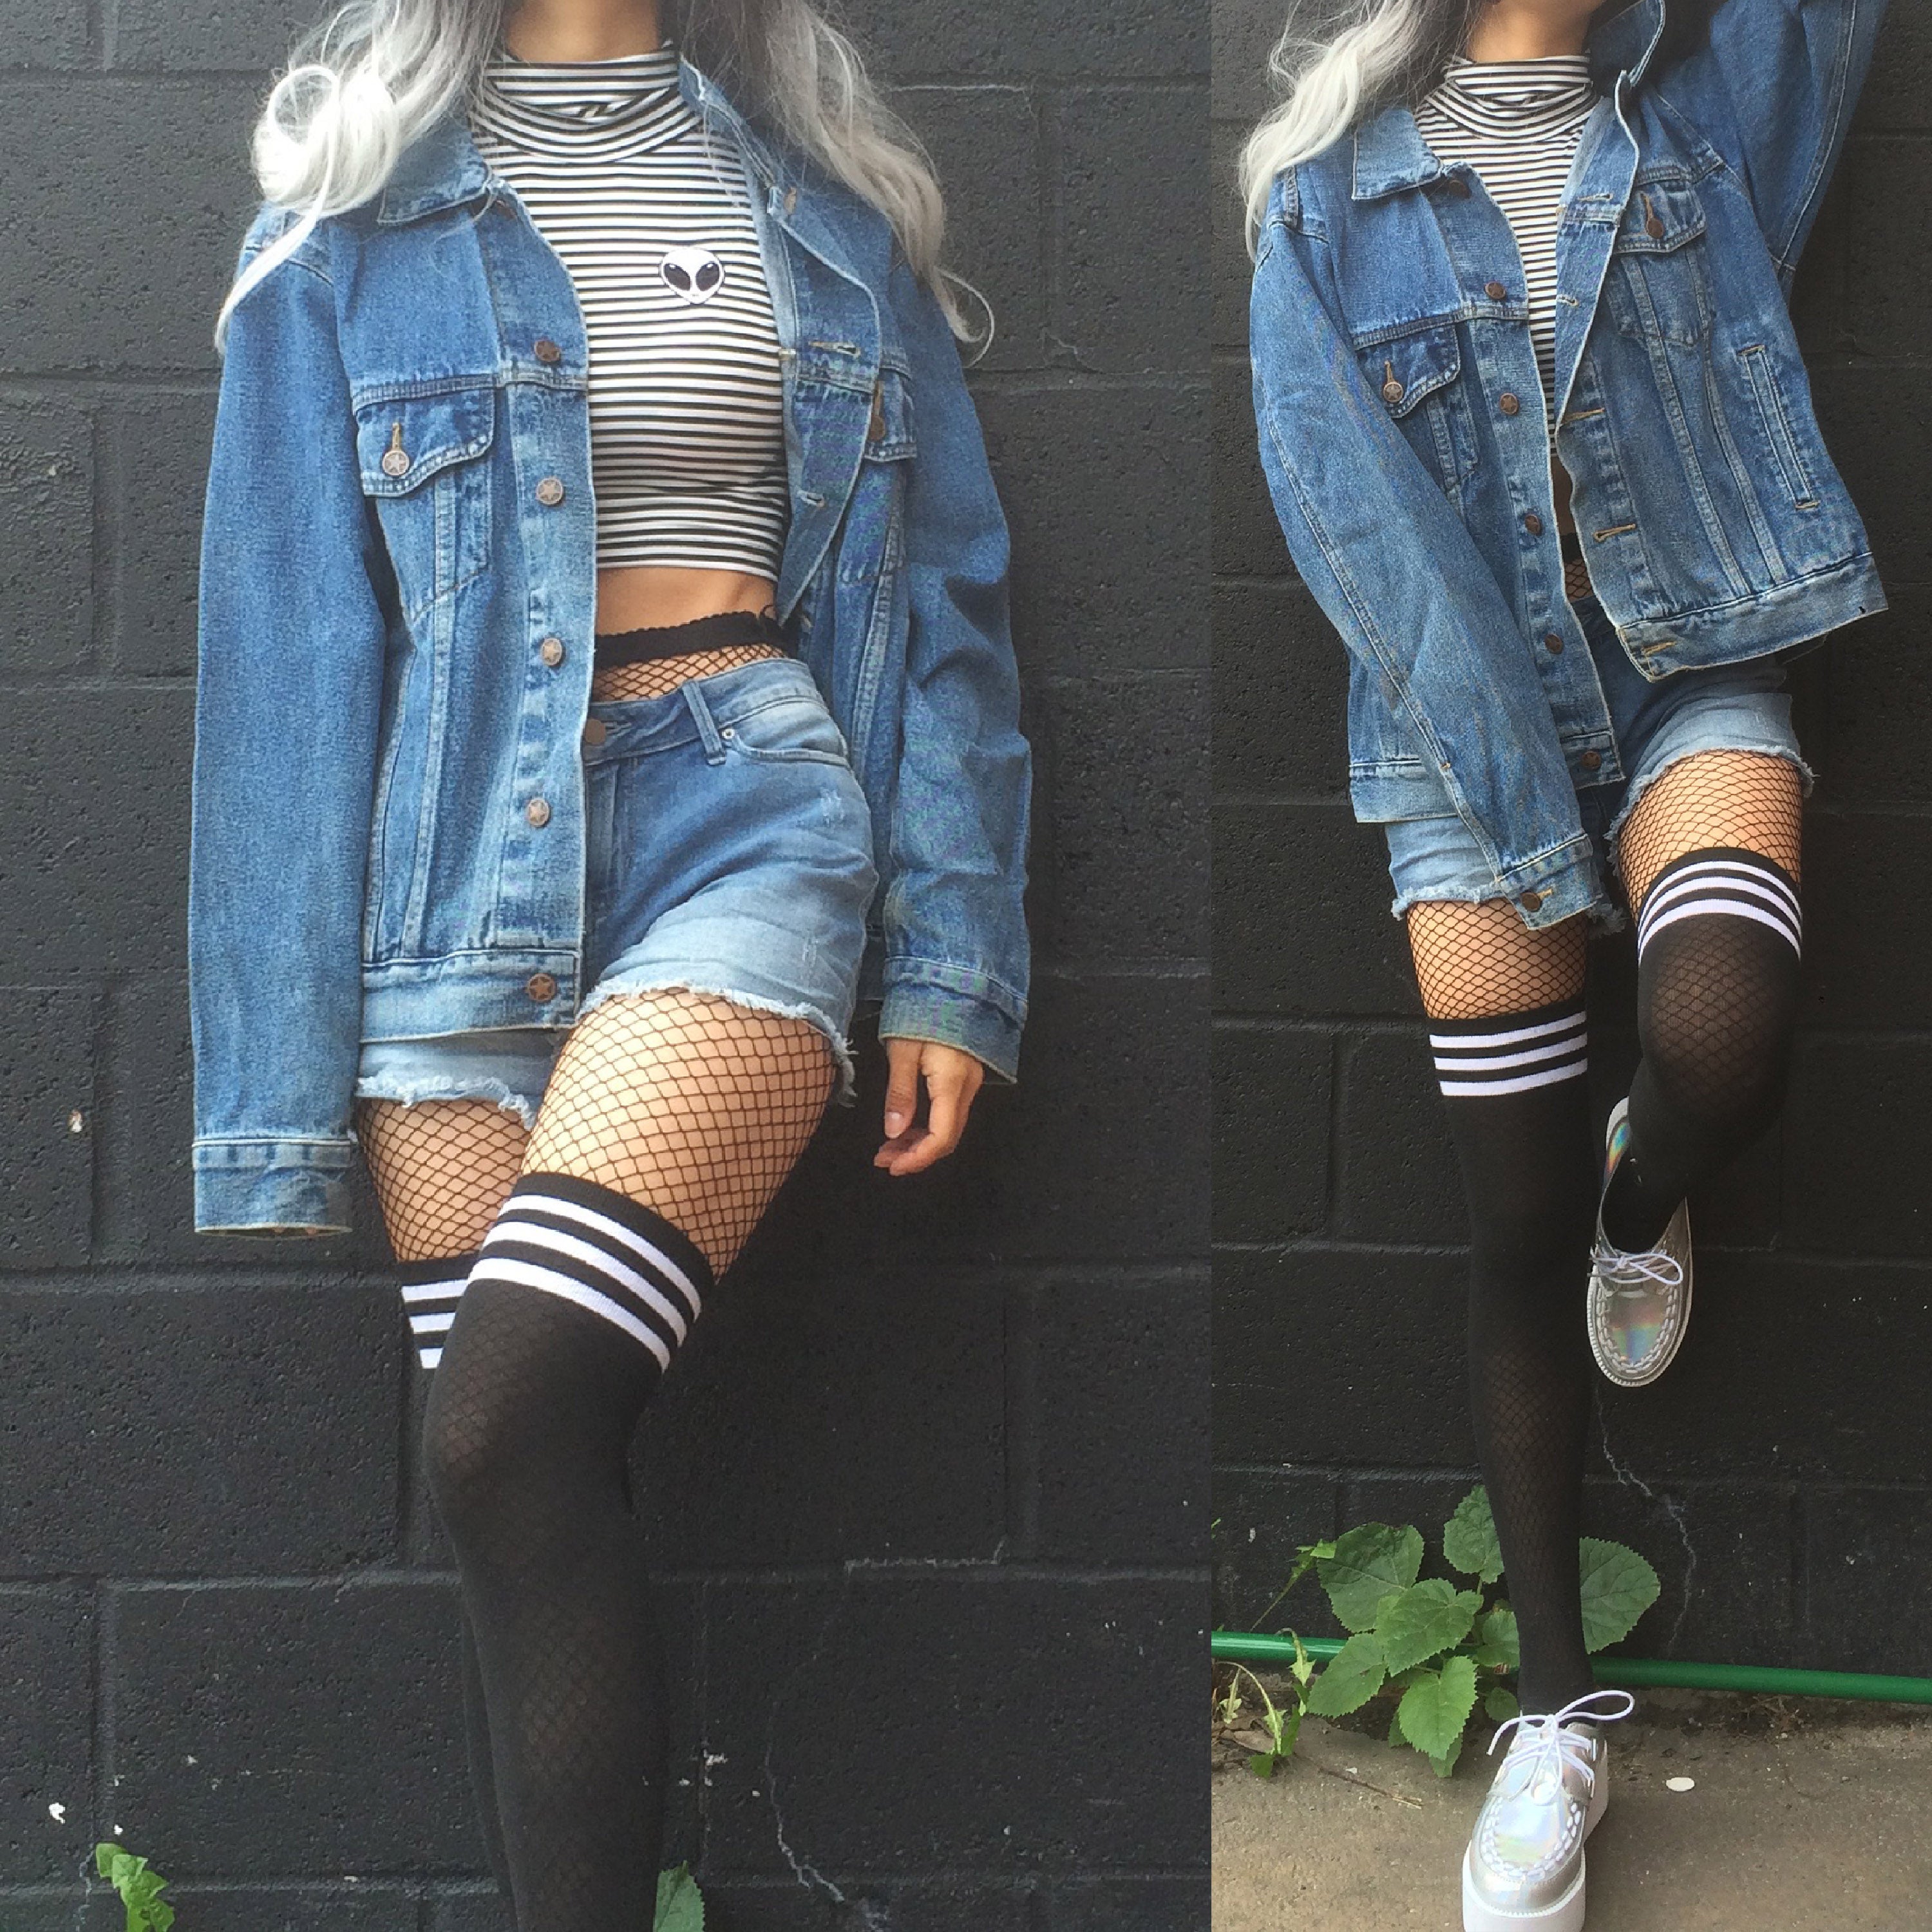 90's outfit